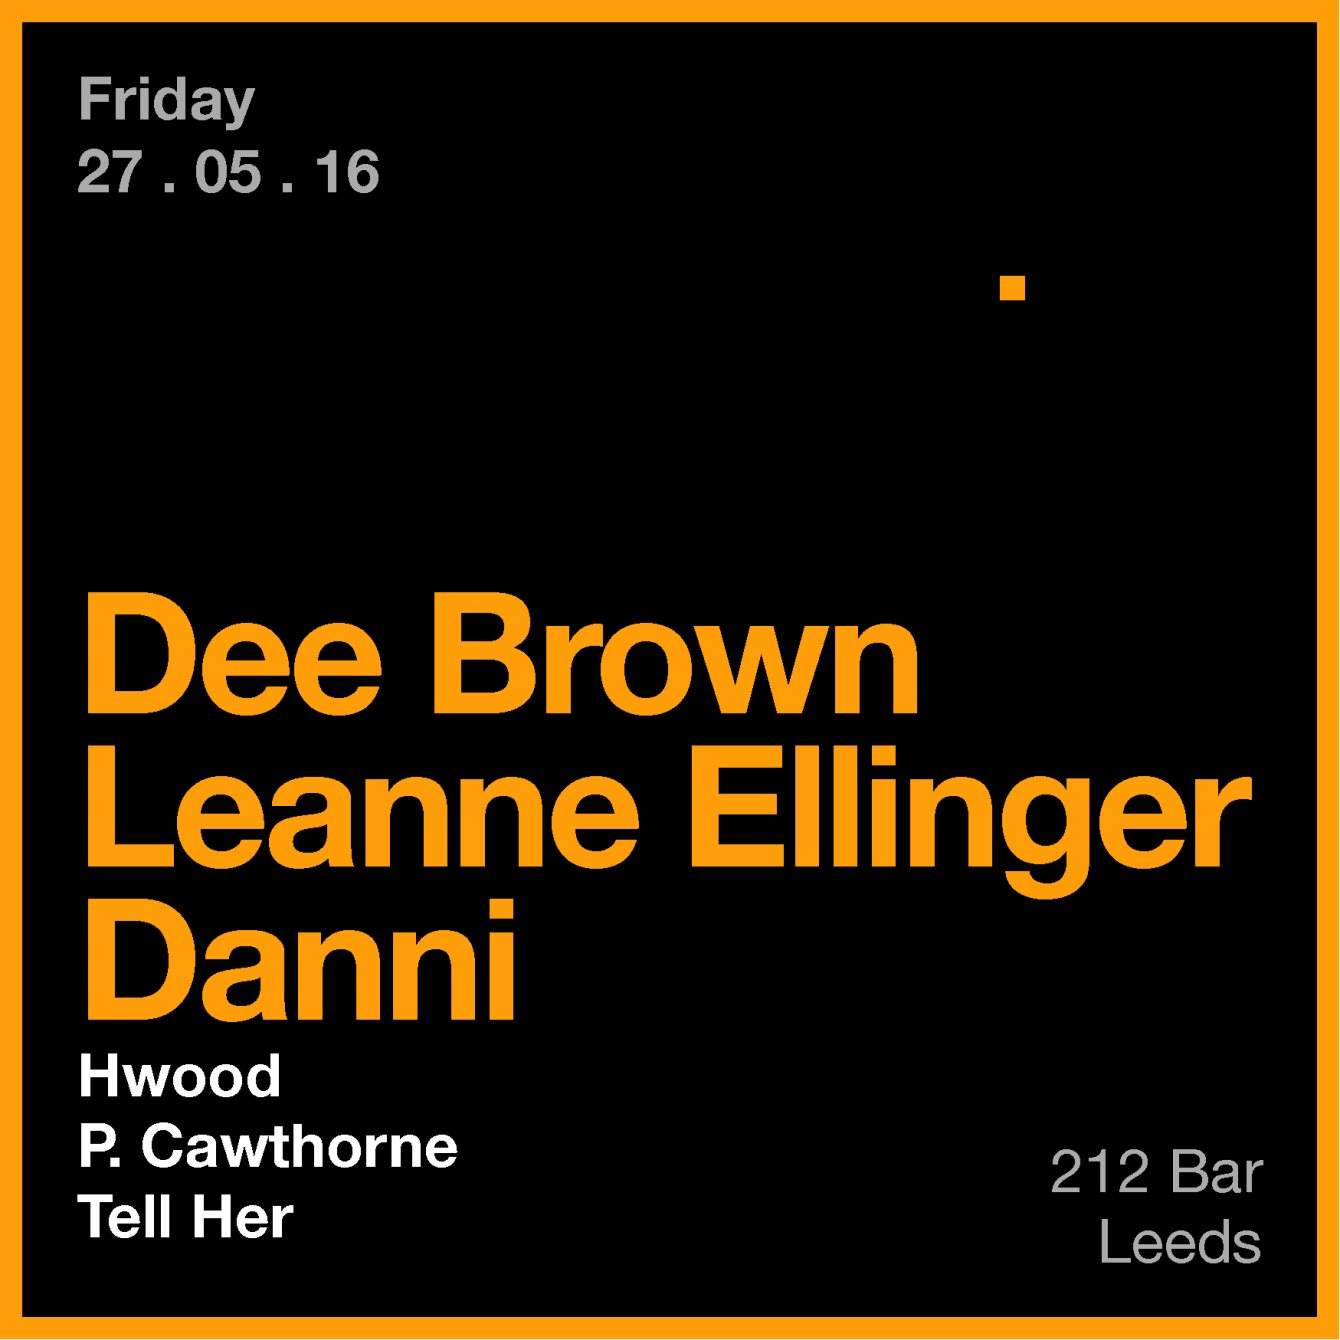 Meld. An Exhibition of Sound: Dee Brown, Leanne Ellinger & Meld Residents - フライヤー表